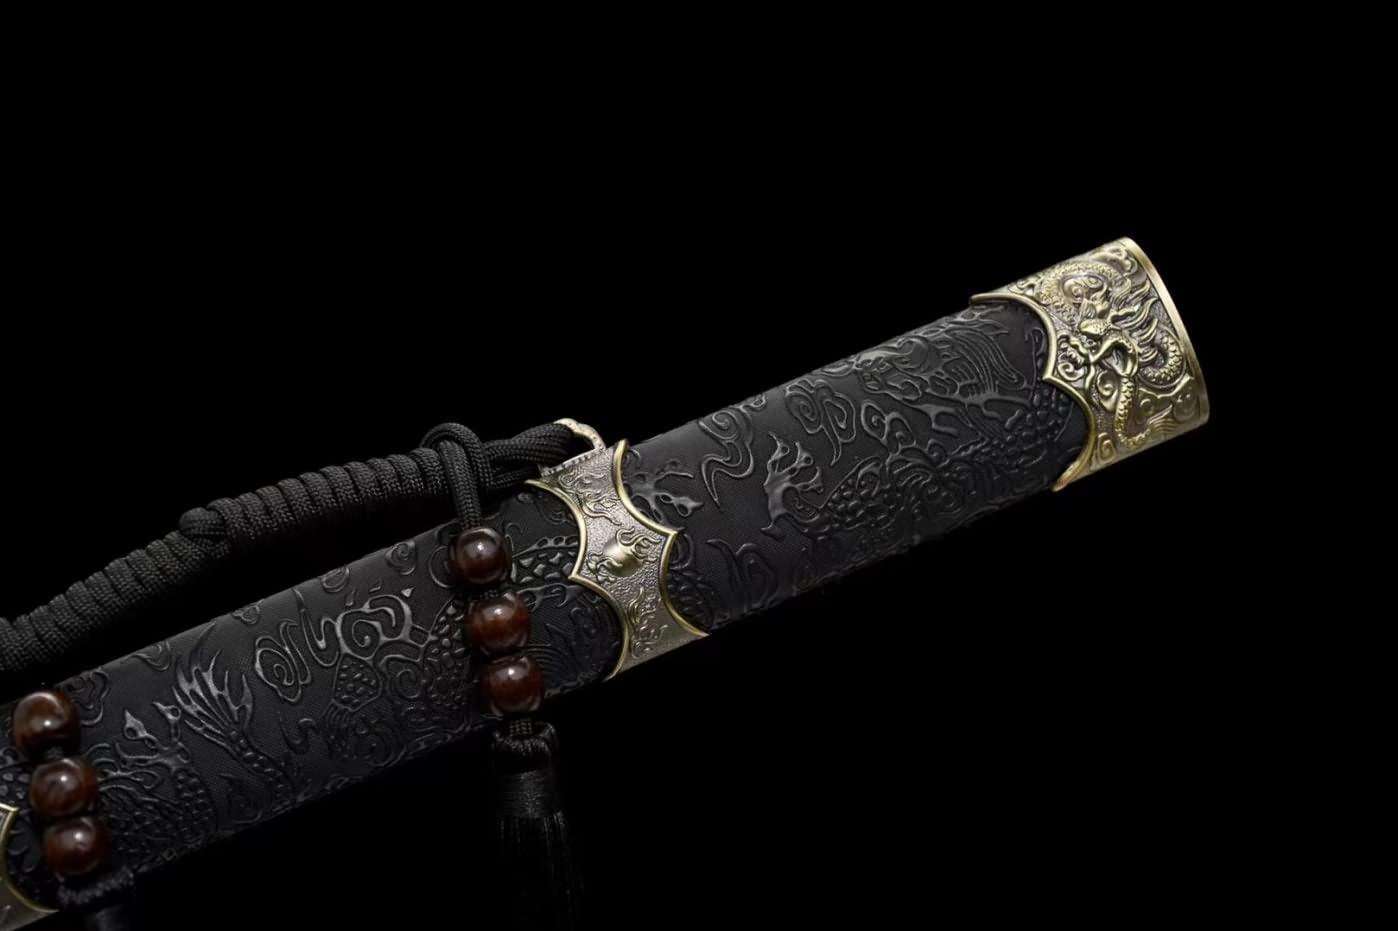 Tang Dao Real,Forged High Carbon Steel Blade,Alloy Fittings,chinese sword